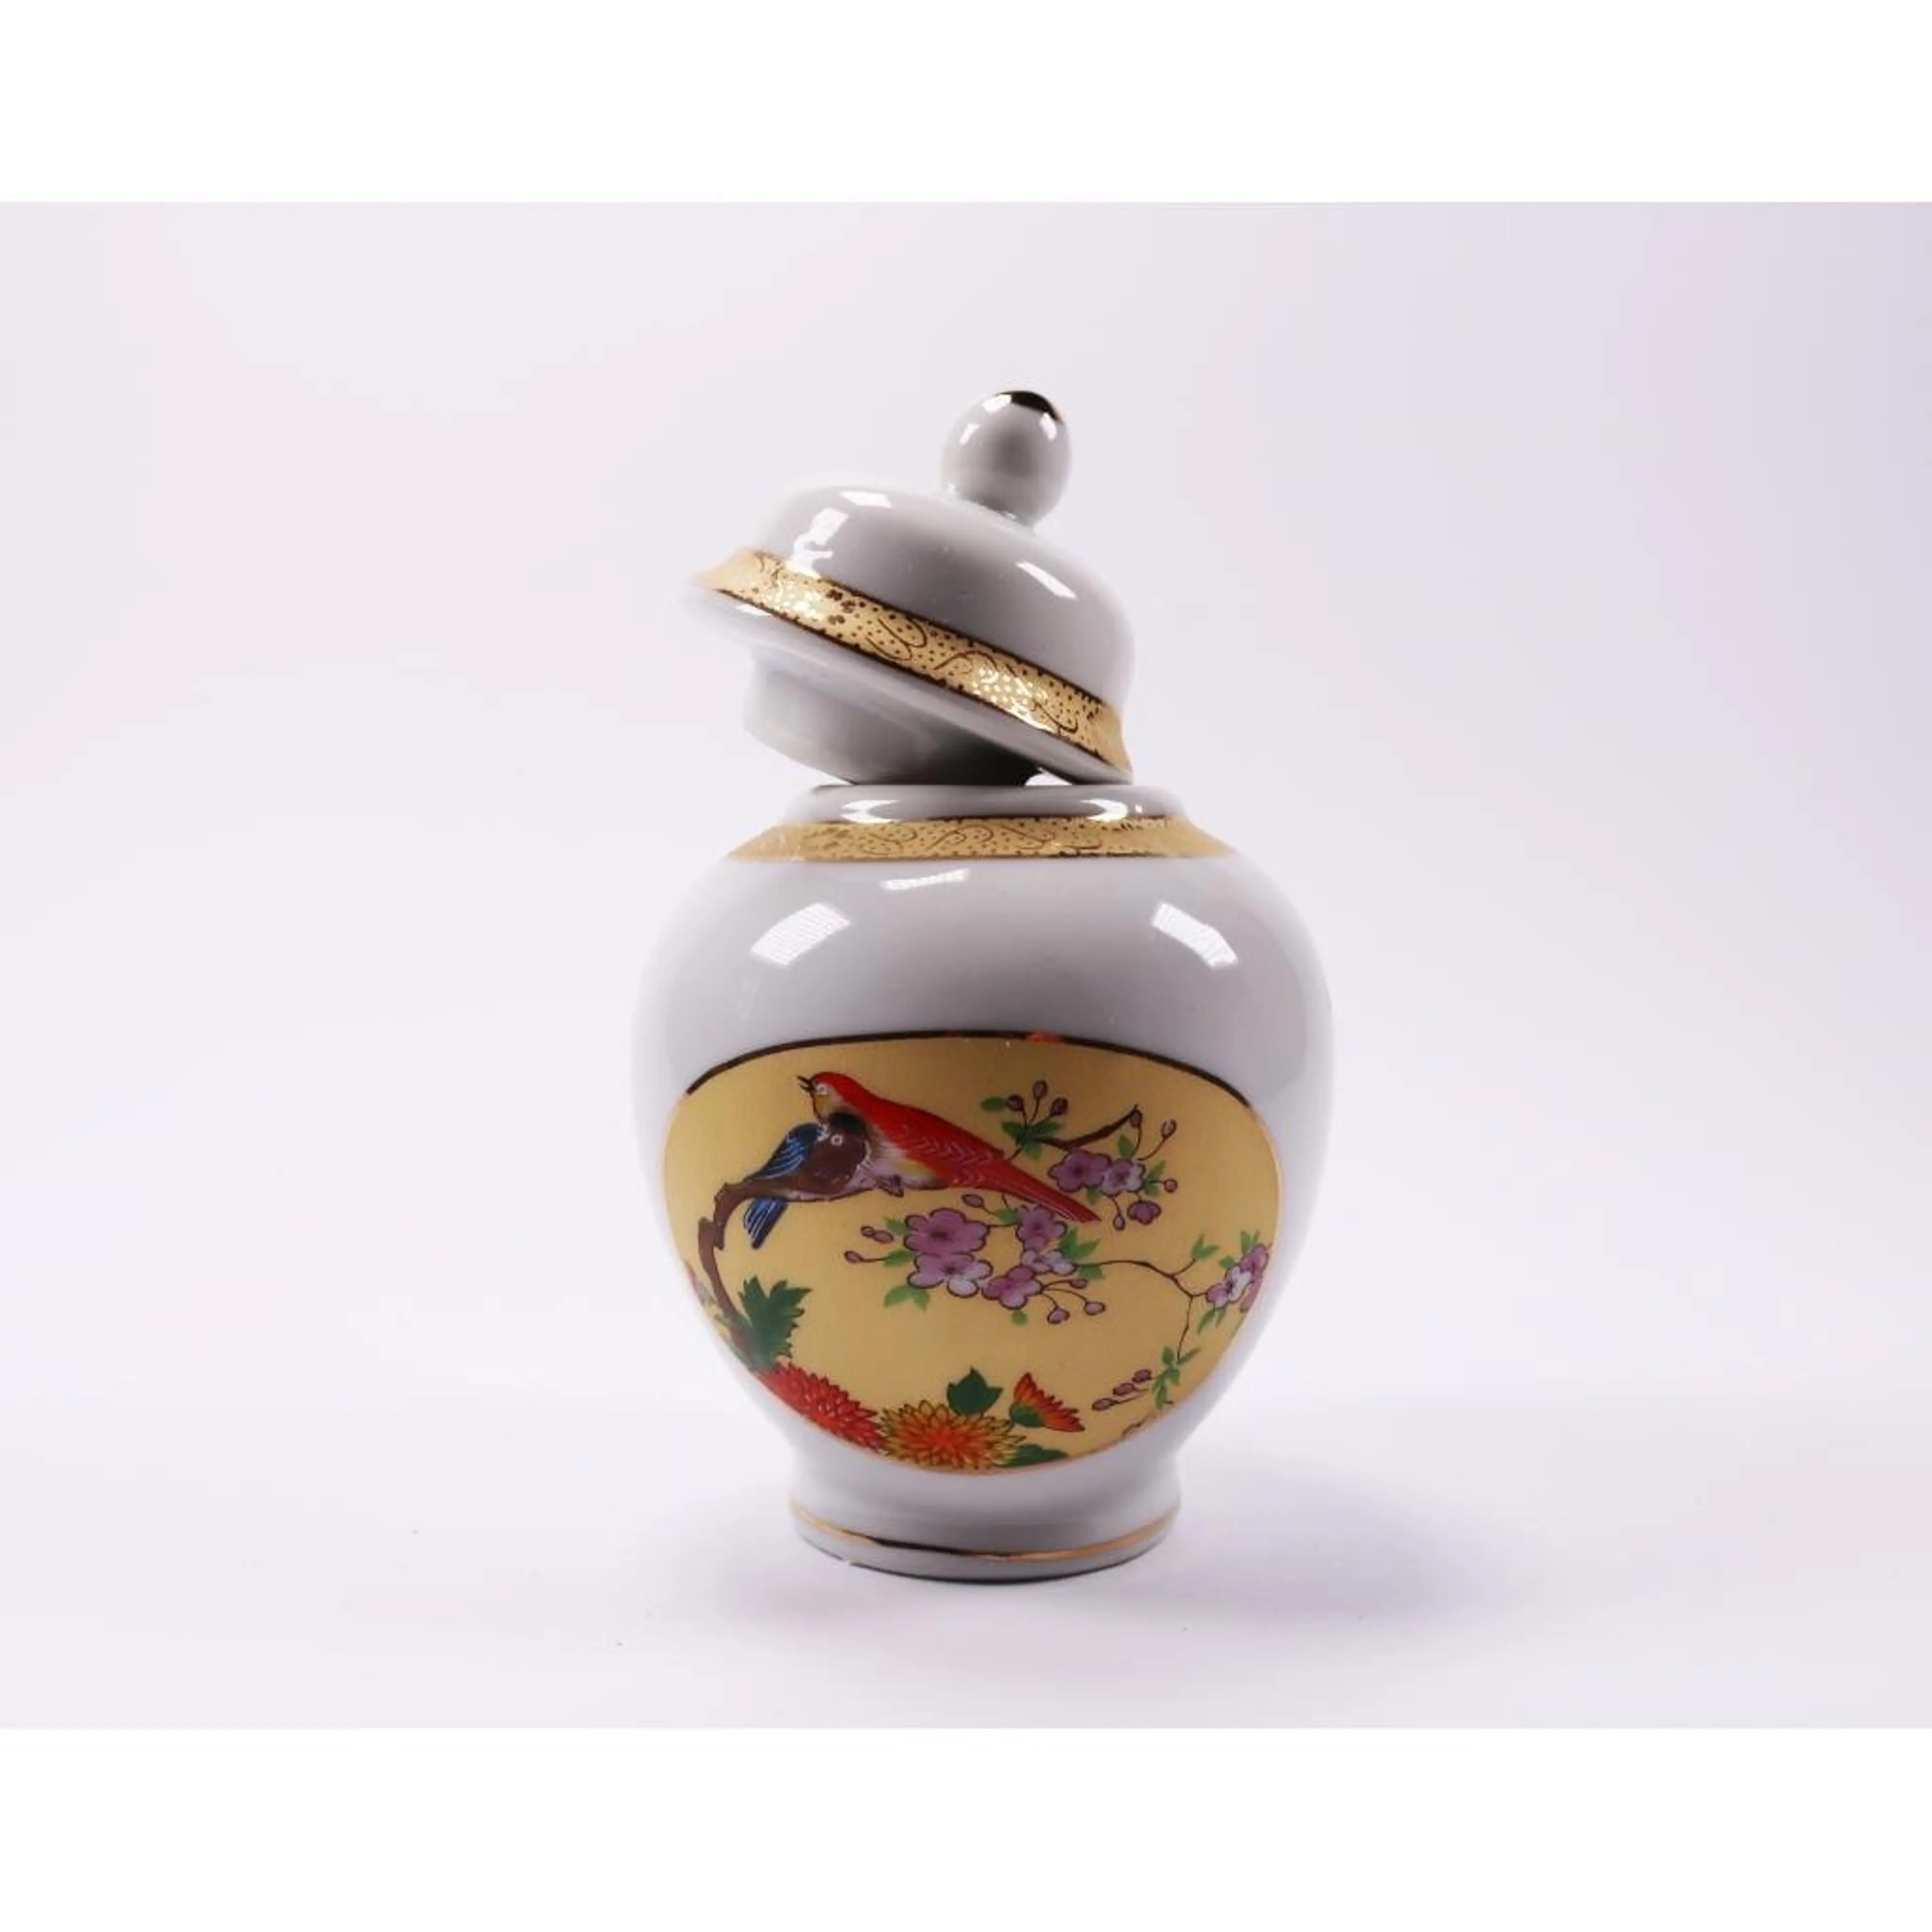 Vintage Ginger Jar With Tropical Birds, Delicate Branches And Gold Details.